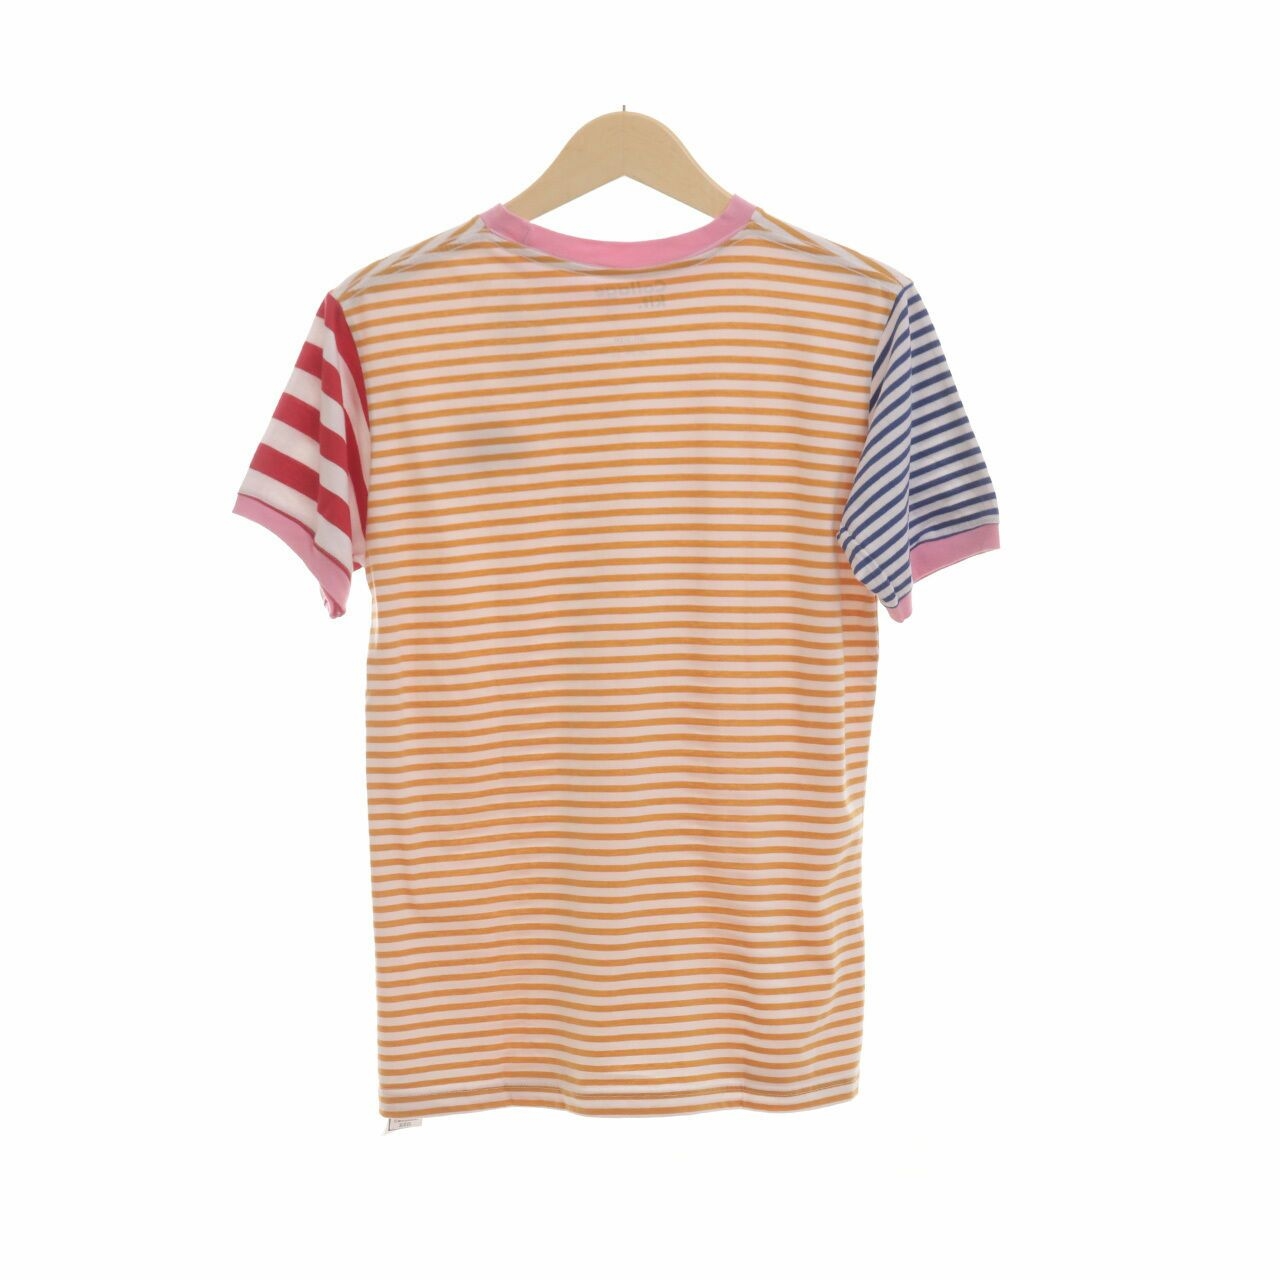 Private Collection Multi Stripes Star T-Shirt